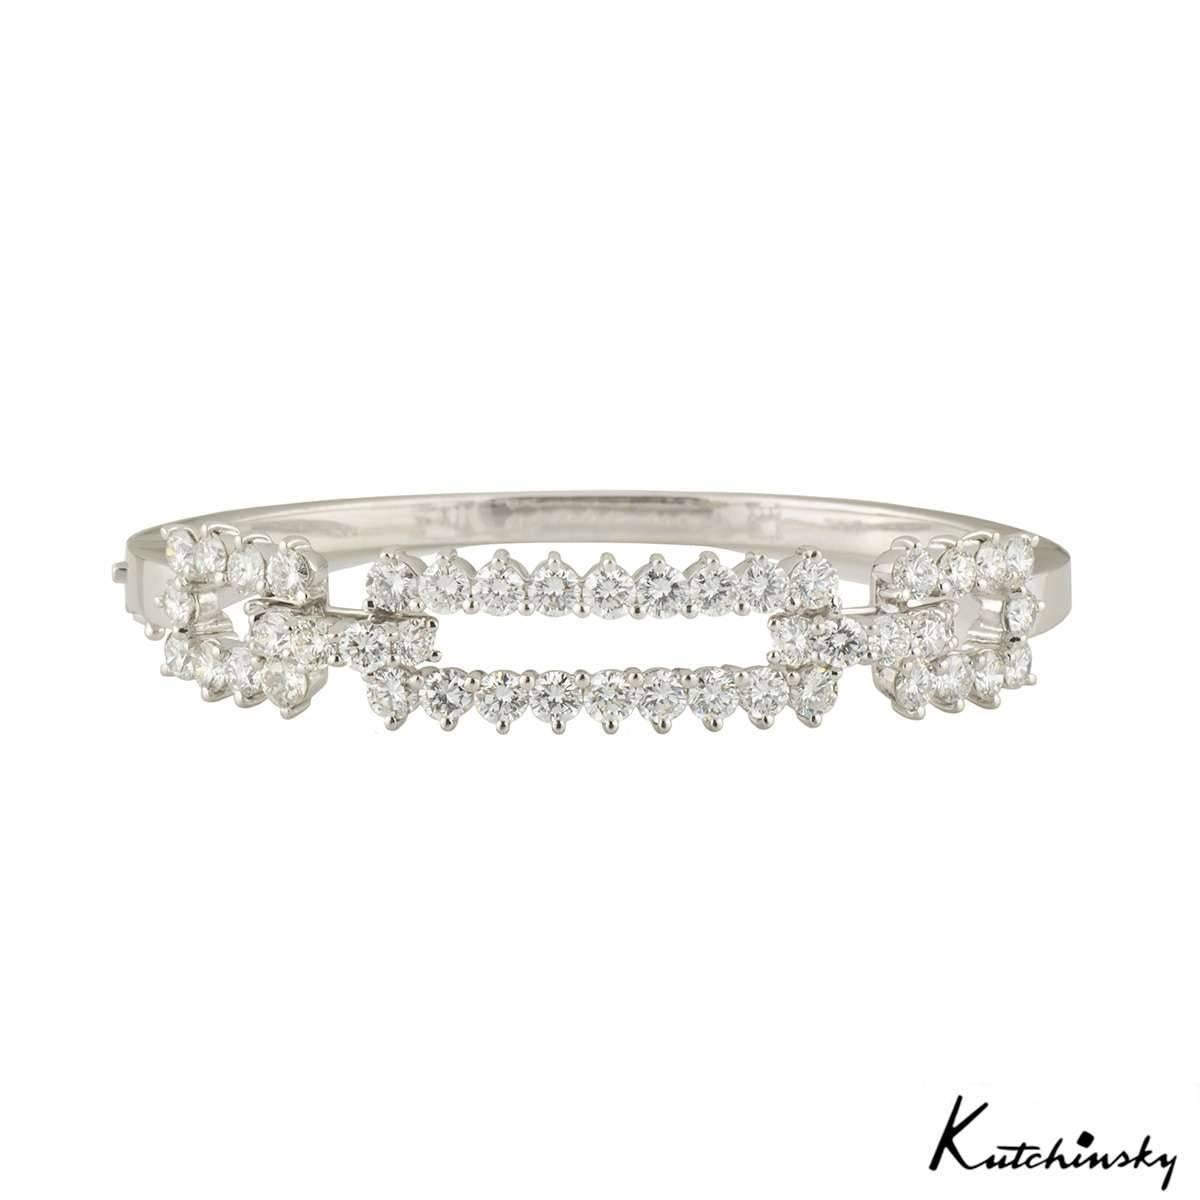 A stunning bangle in 18k white gold by Kutchinsky. The bangle features a diamond set openwork rectangular bar motif, set with 46 round brilliant cut claw set diamonds. The diamonds have a total weight of approximately 4.60ct, predominantly F colour